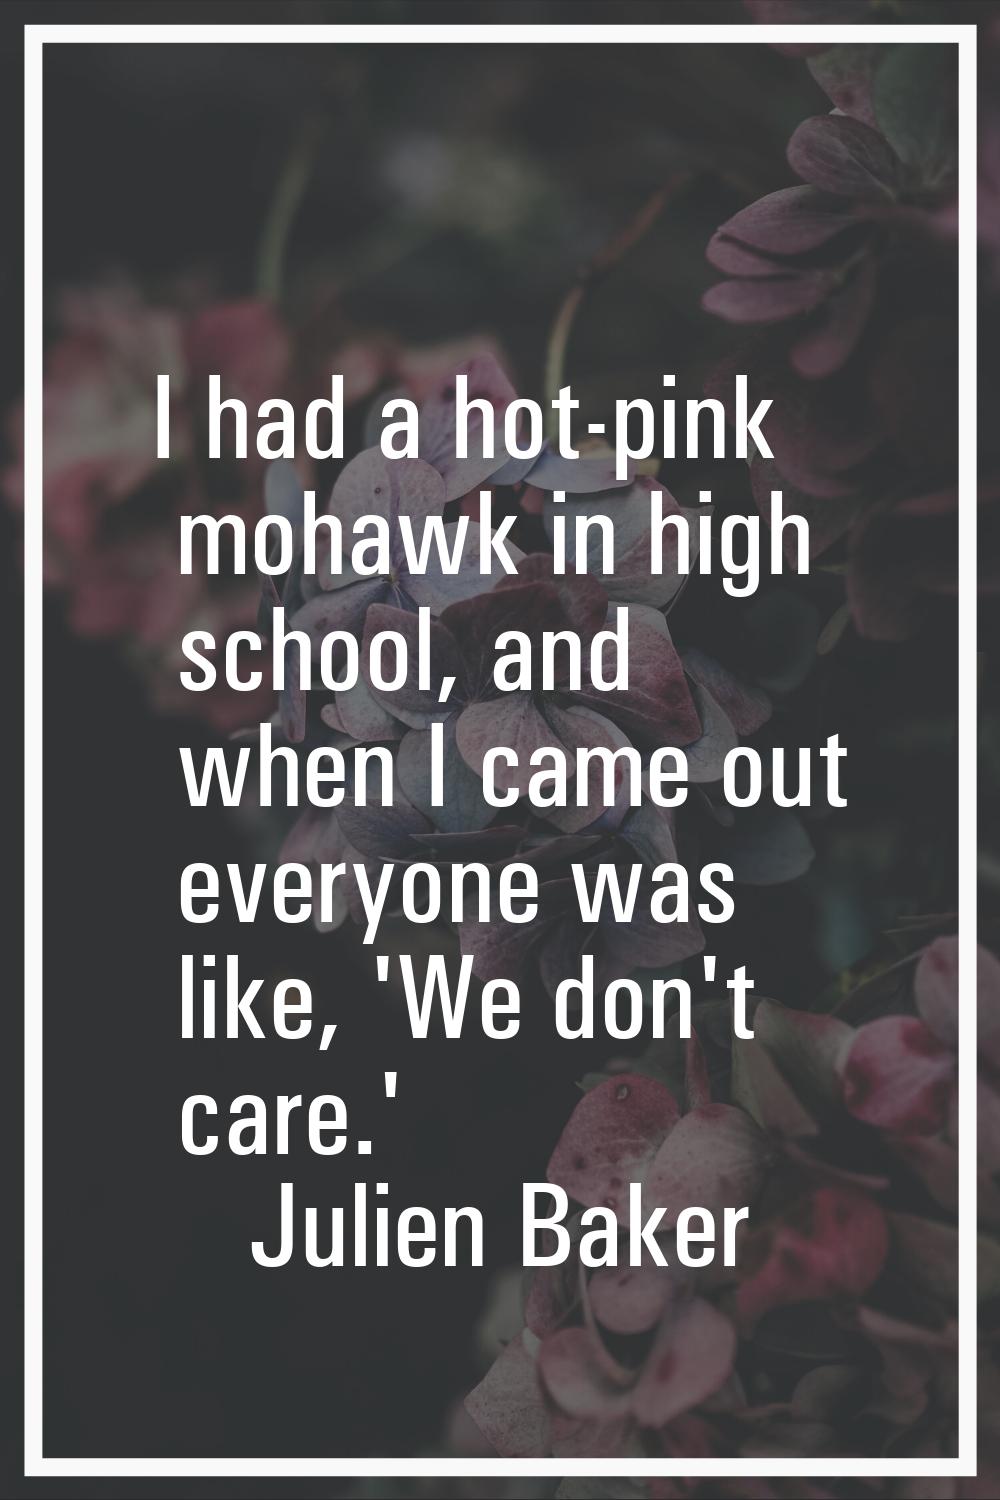 I had a hot-pink mohawk in high school, and when I came out everyone was like, 'We don't care.'